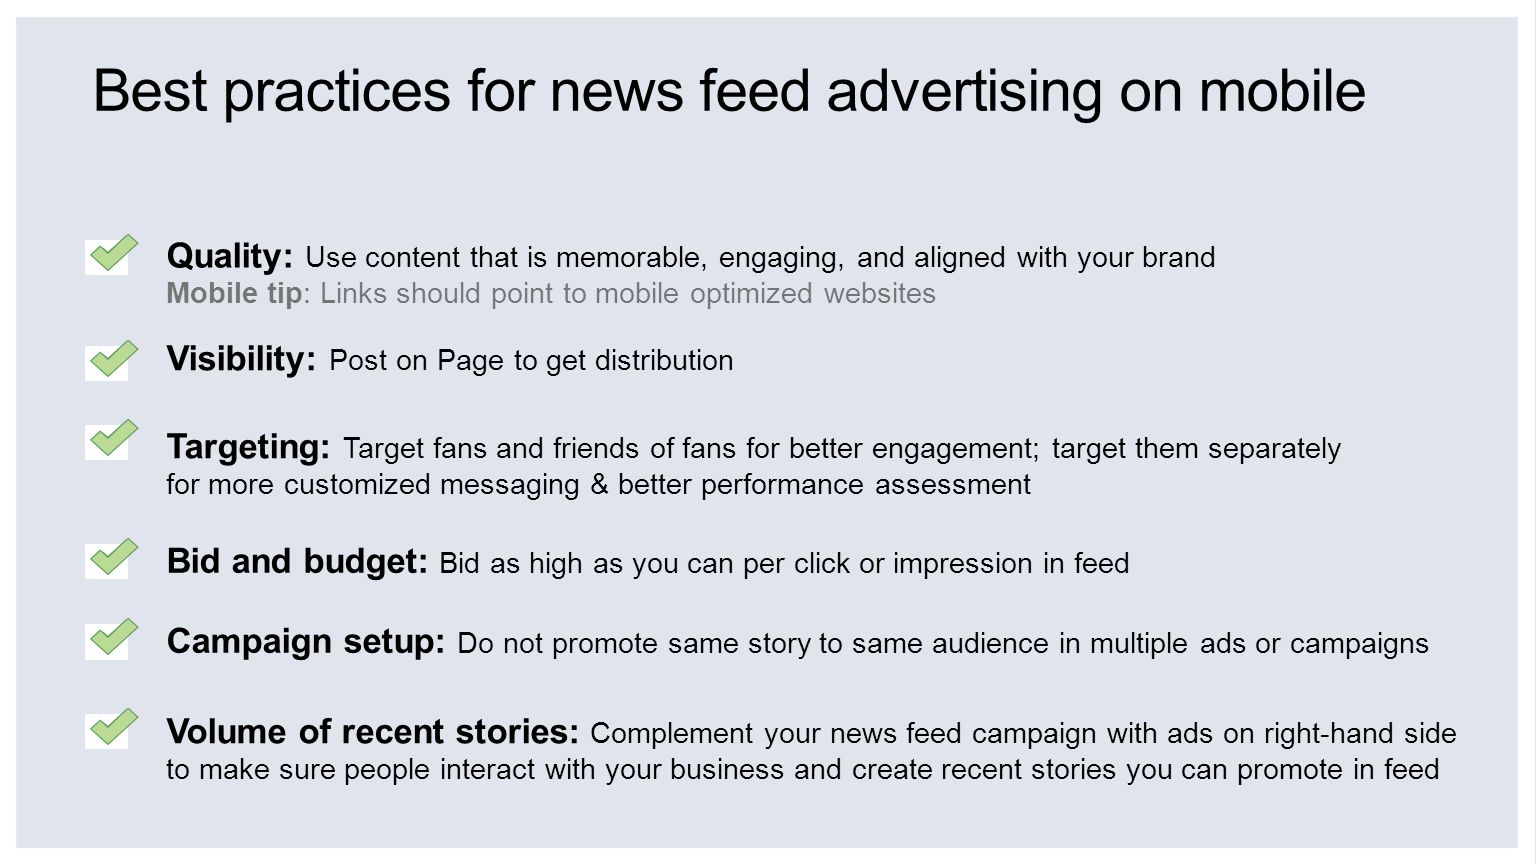 Best practices for news feed advertising on mobile Volume of recent stories: Complement your news feed campaign with ads on right-hand side to make sure people interact with your business and create recent stories you can promote in feed Quality: Use content that is memorable, engaging, and aligned with your brand Mobile tip: Links should point to mobile optimized websites Targeting: Target fans and friends of fans for better engagement; target them separately for more customized messaging & better performance assessment Bid and budget: Bid as high as you can per click or impression in feed Campaign setup: Do not promote same story to same audience in multiple ads or campaigns Visibility: Post on Page to get distribution